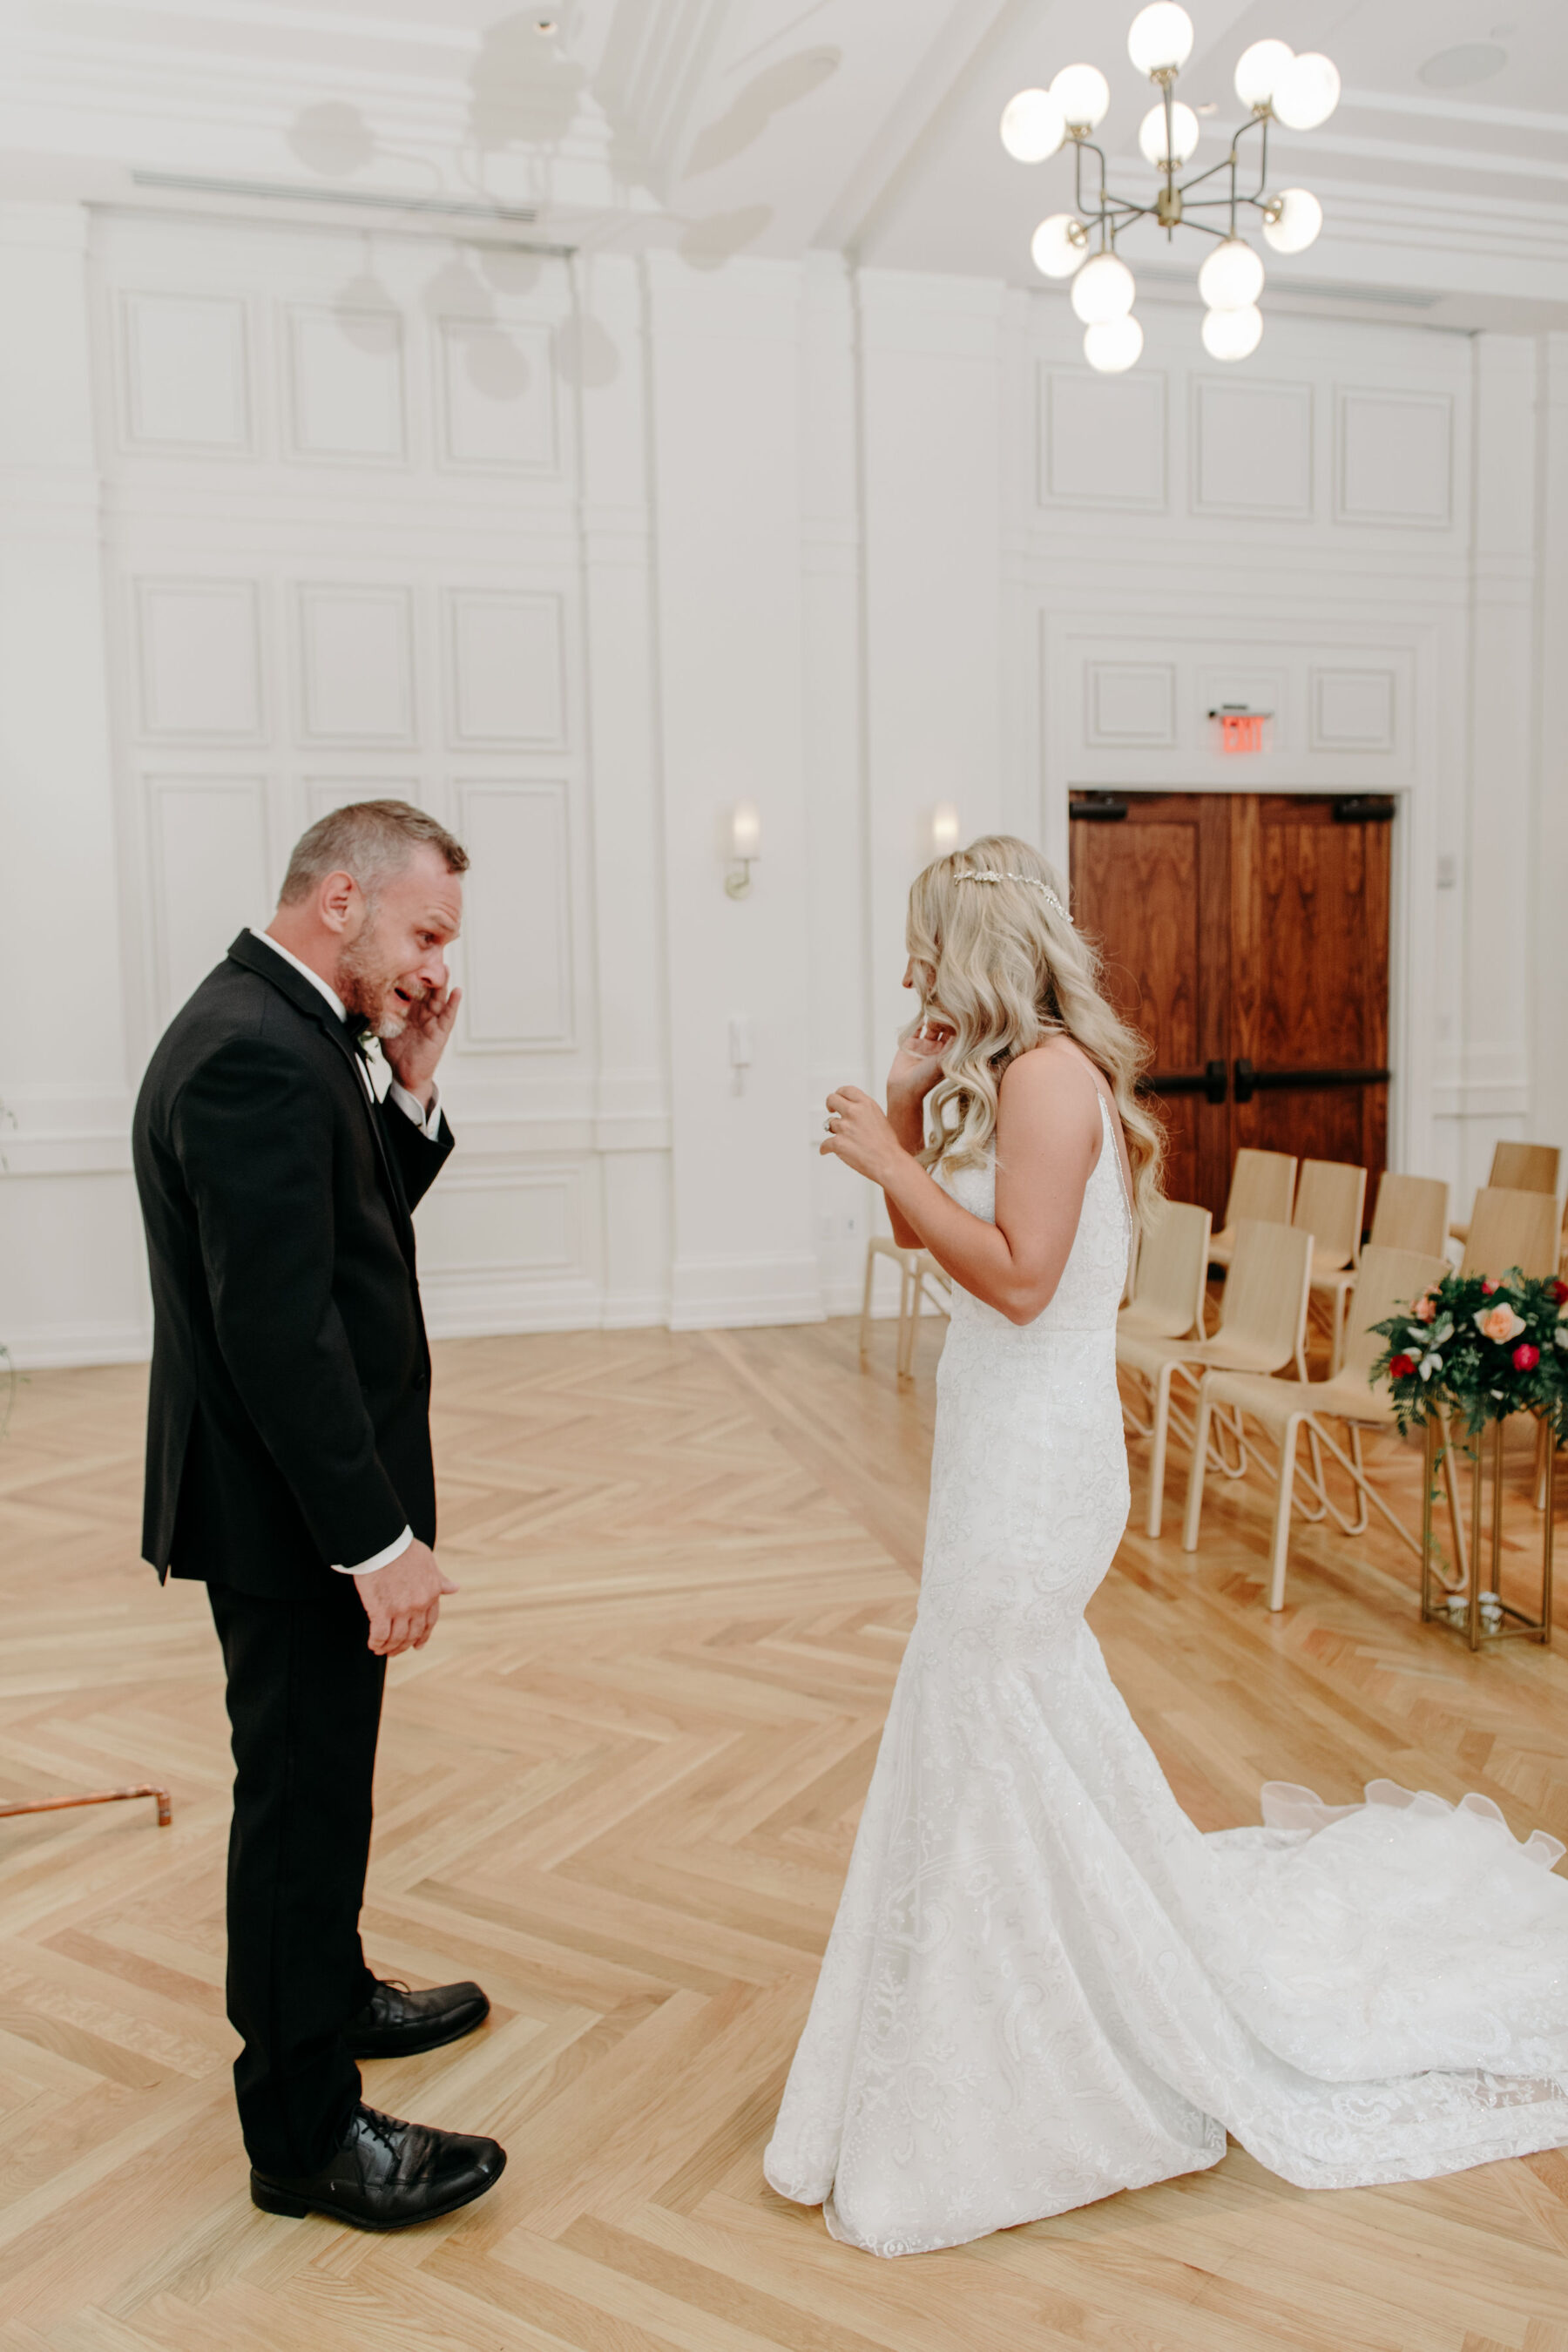 Wedding first look: Summer Tennessee Wedding at Noelle from Jayde J. Smith Events featured on Nashville Bride Guide